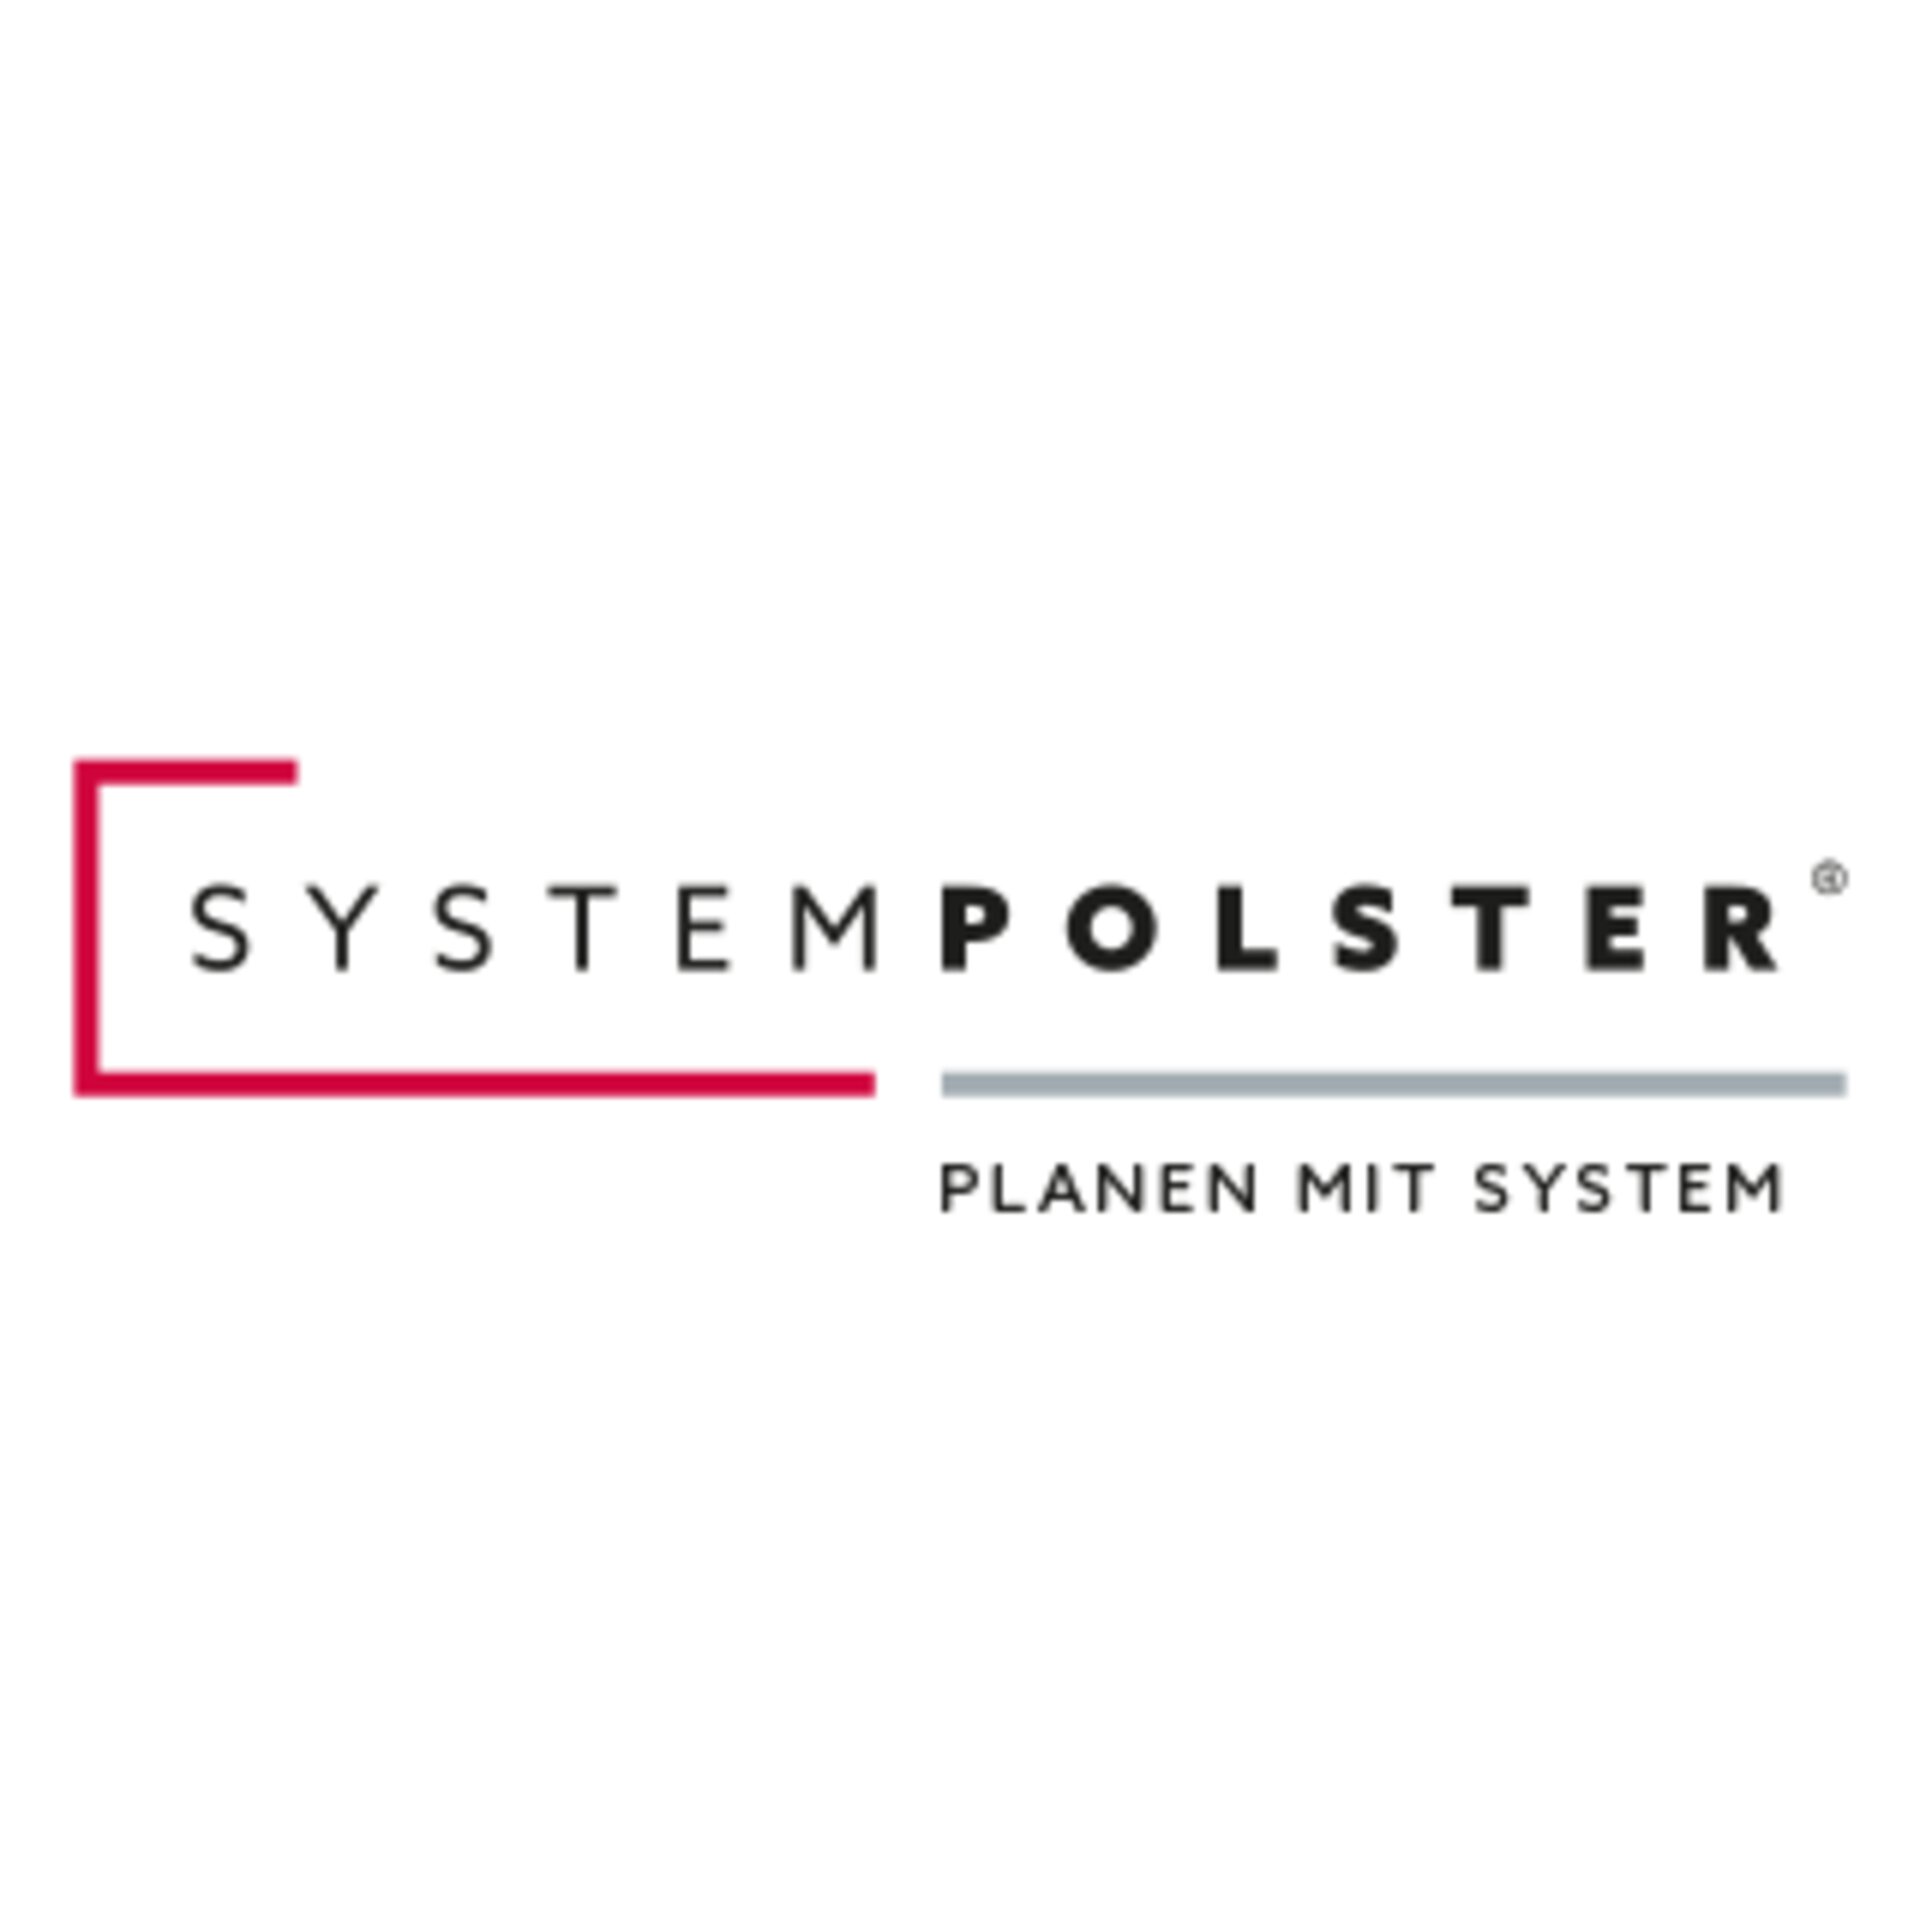 Systempolster